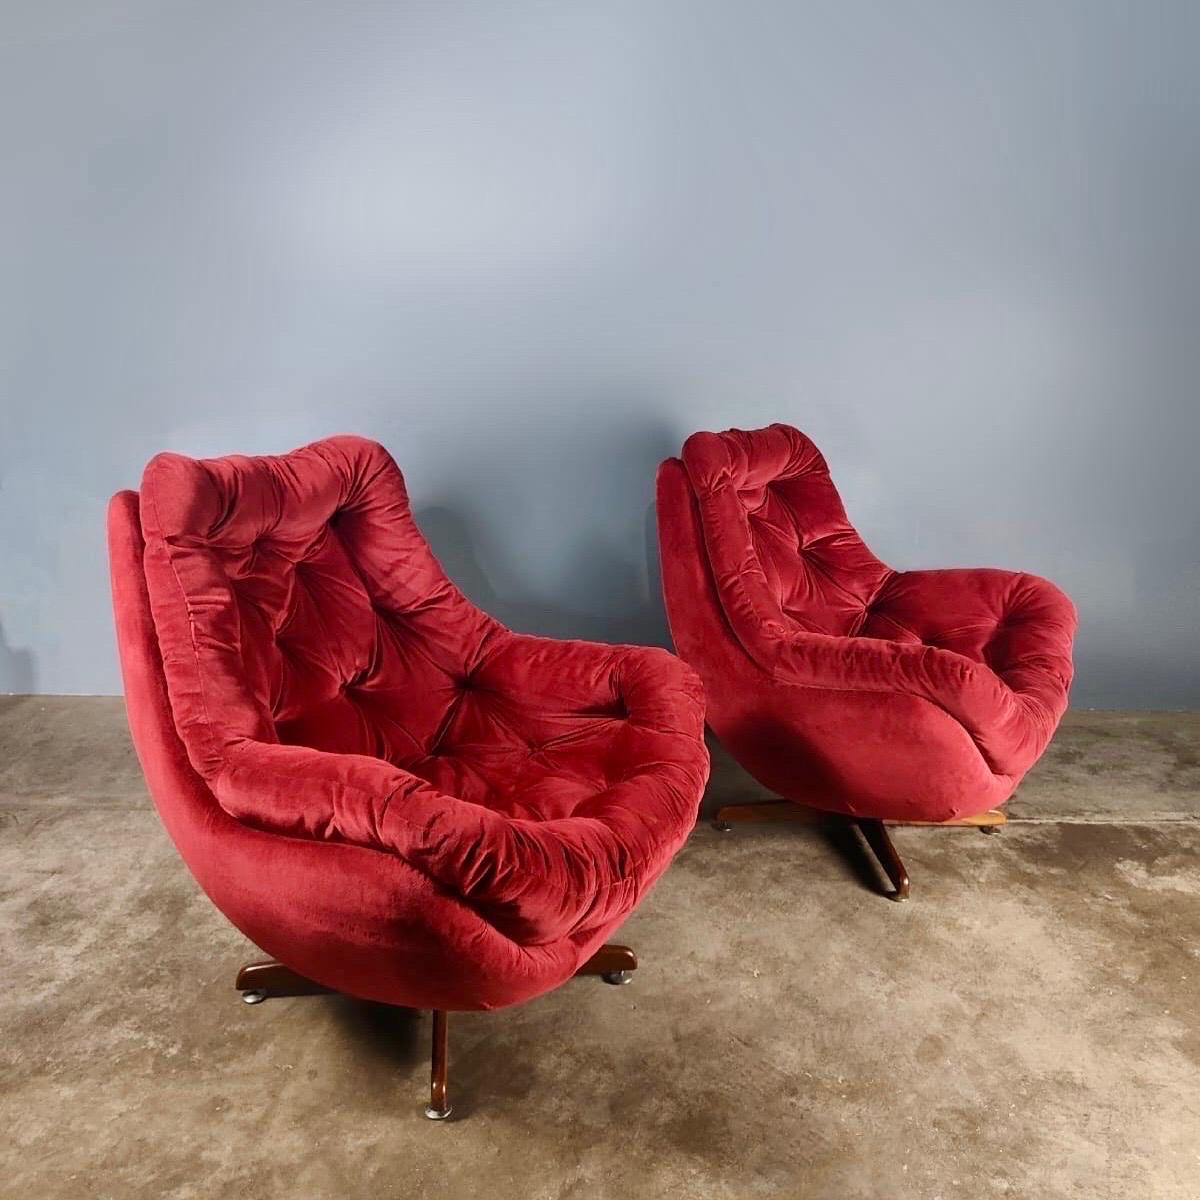 New Stock ✅

Matching Pair Of Pink Red Swivel Velvet Lounge Chairs

A matching pair of pink red velvet swivel egg chairs lounge chairs dating from the late 1960s.

With the original pink red tufted velvet upholstery, which has been professionally